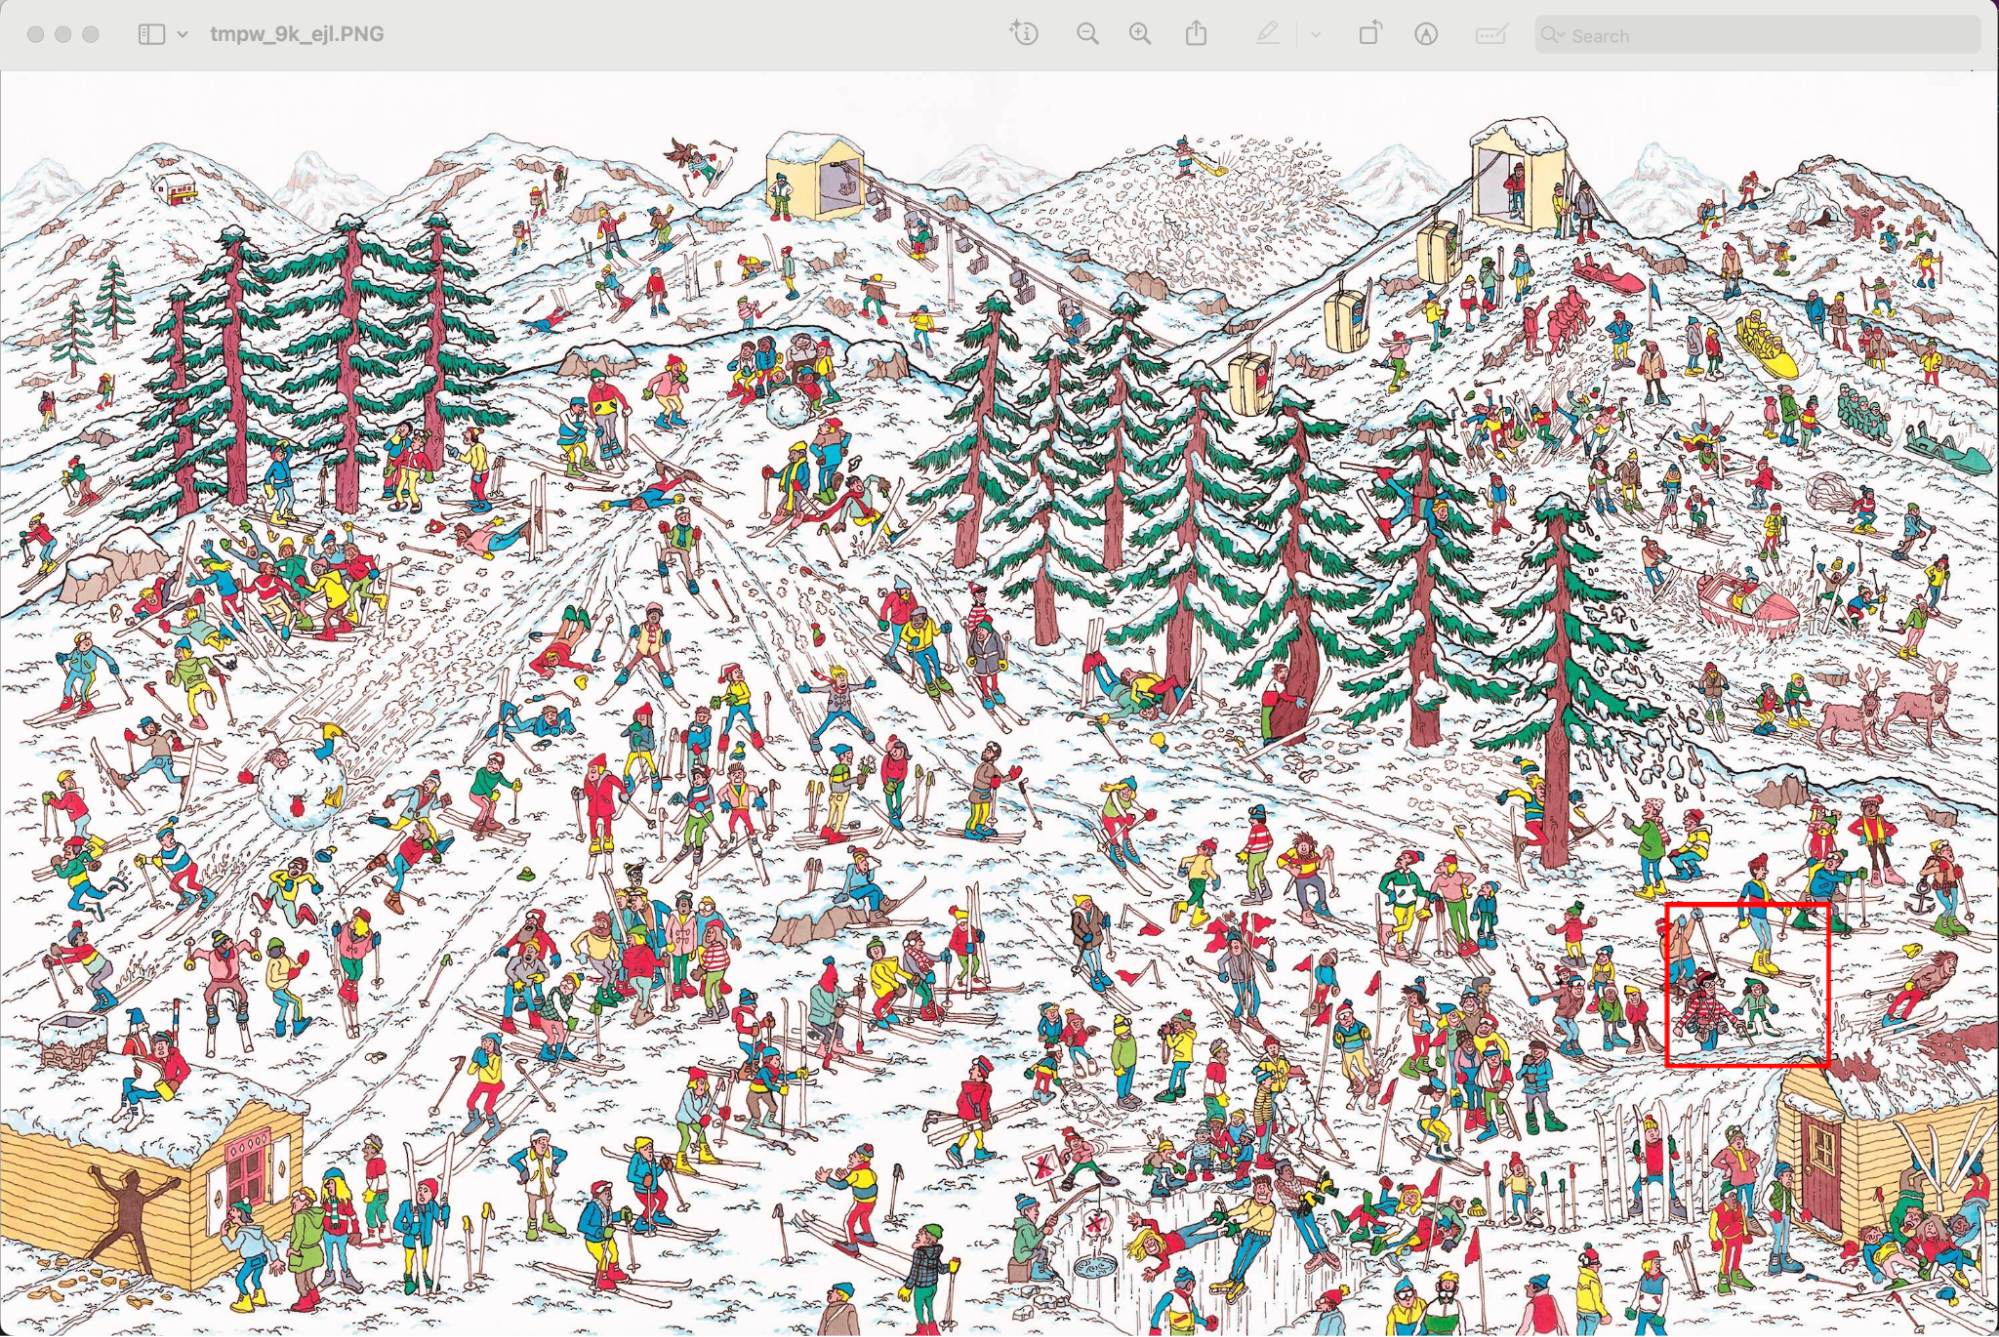 Waldo image re-assembled and highlighted